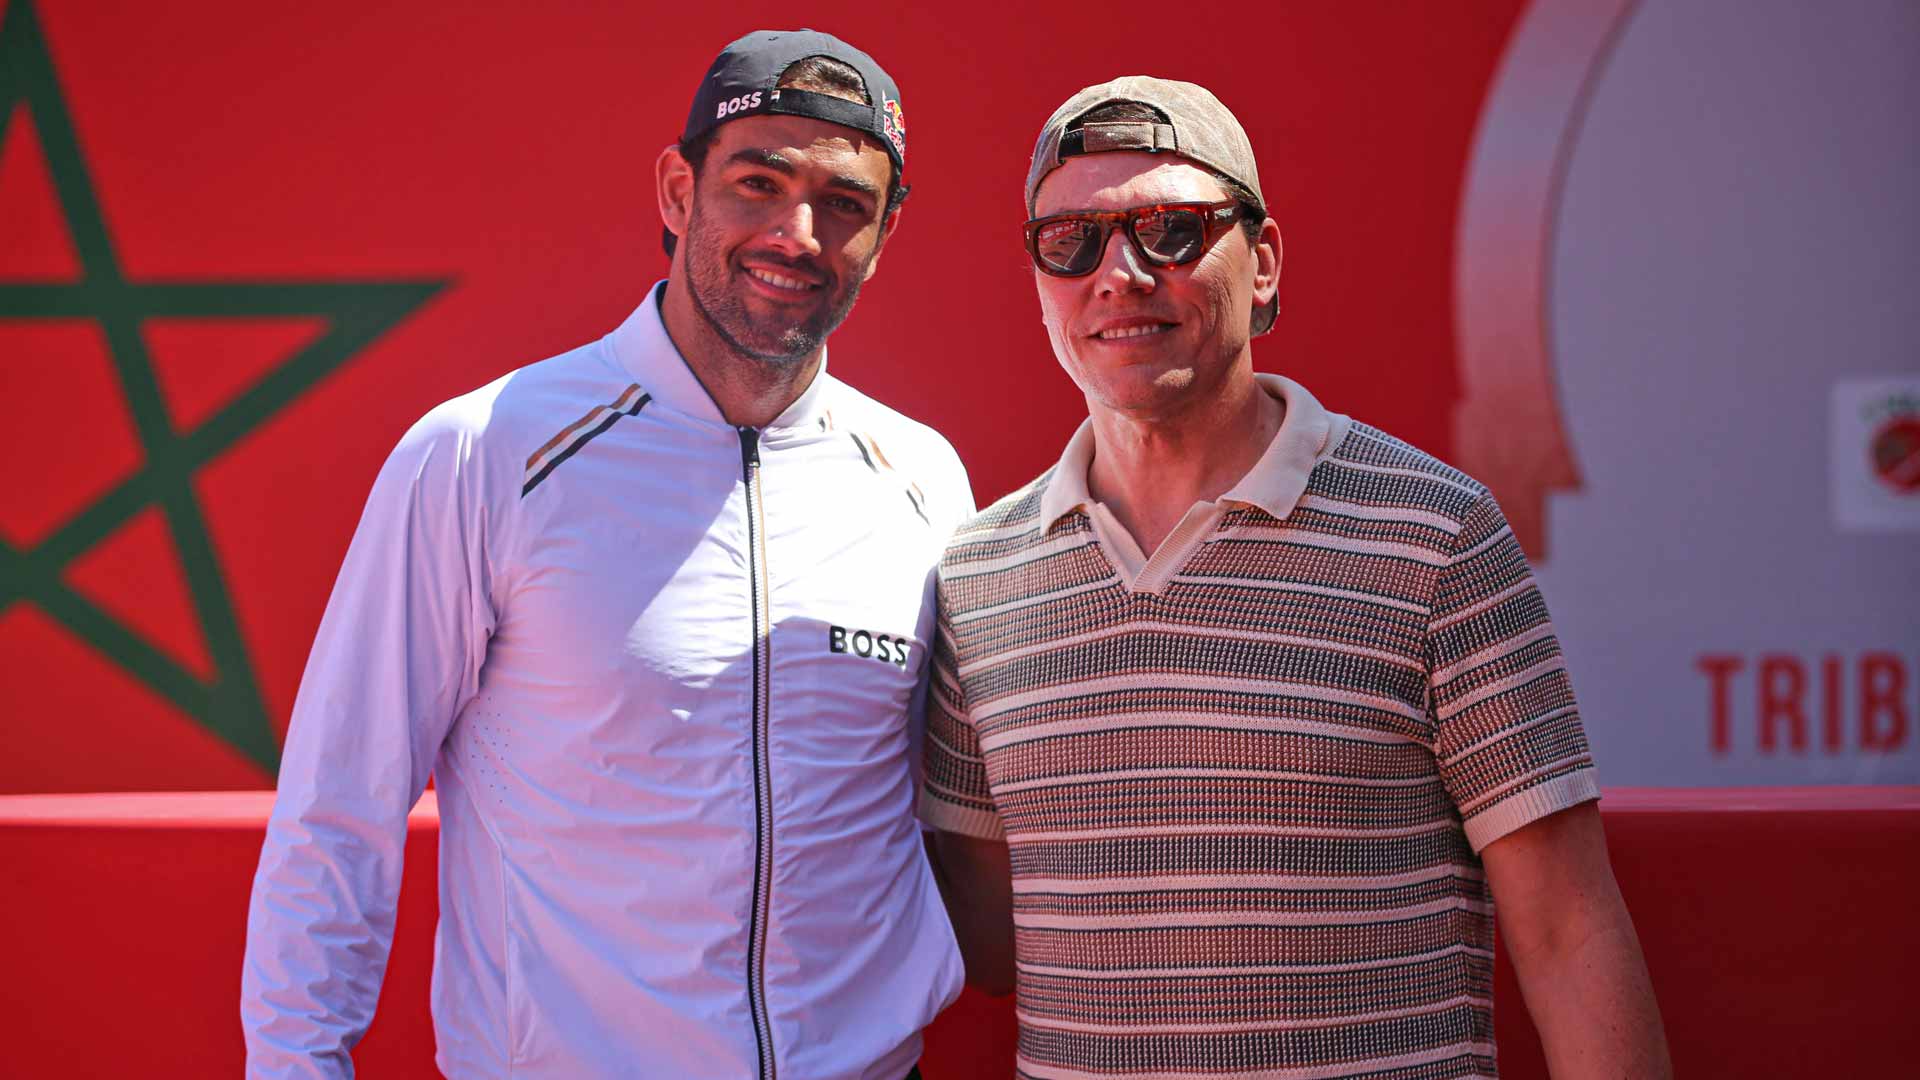 Matteo Berrettini and Tiesto pose for a photo after the Italian's win Tuesday in Marrakech.